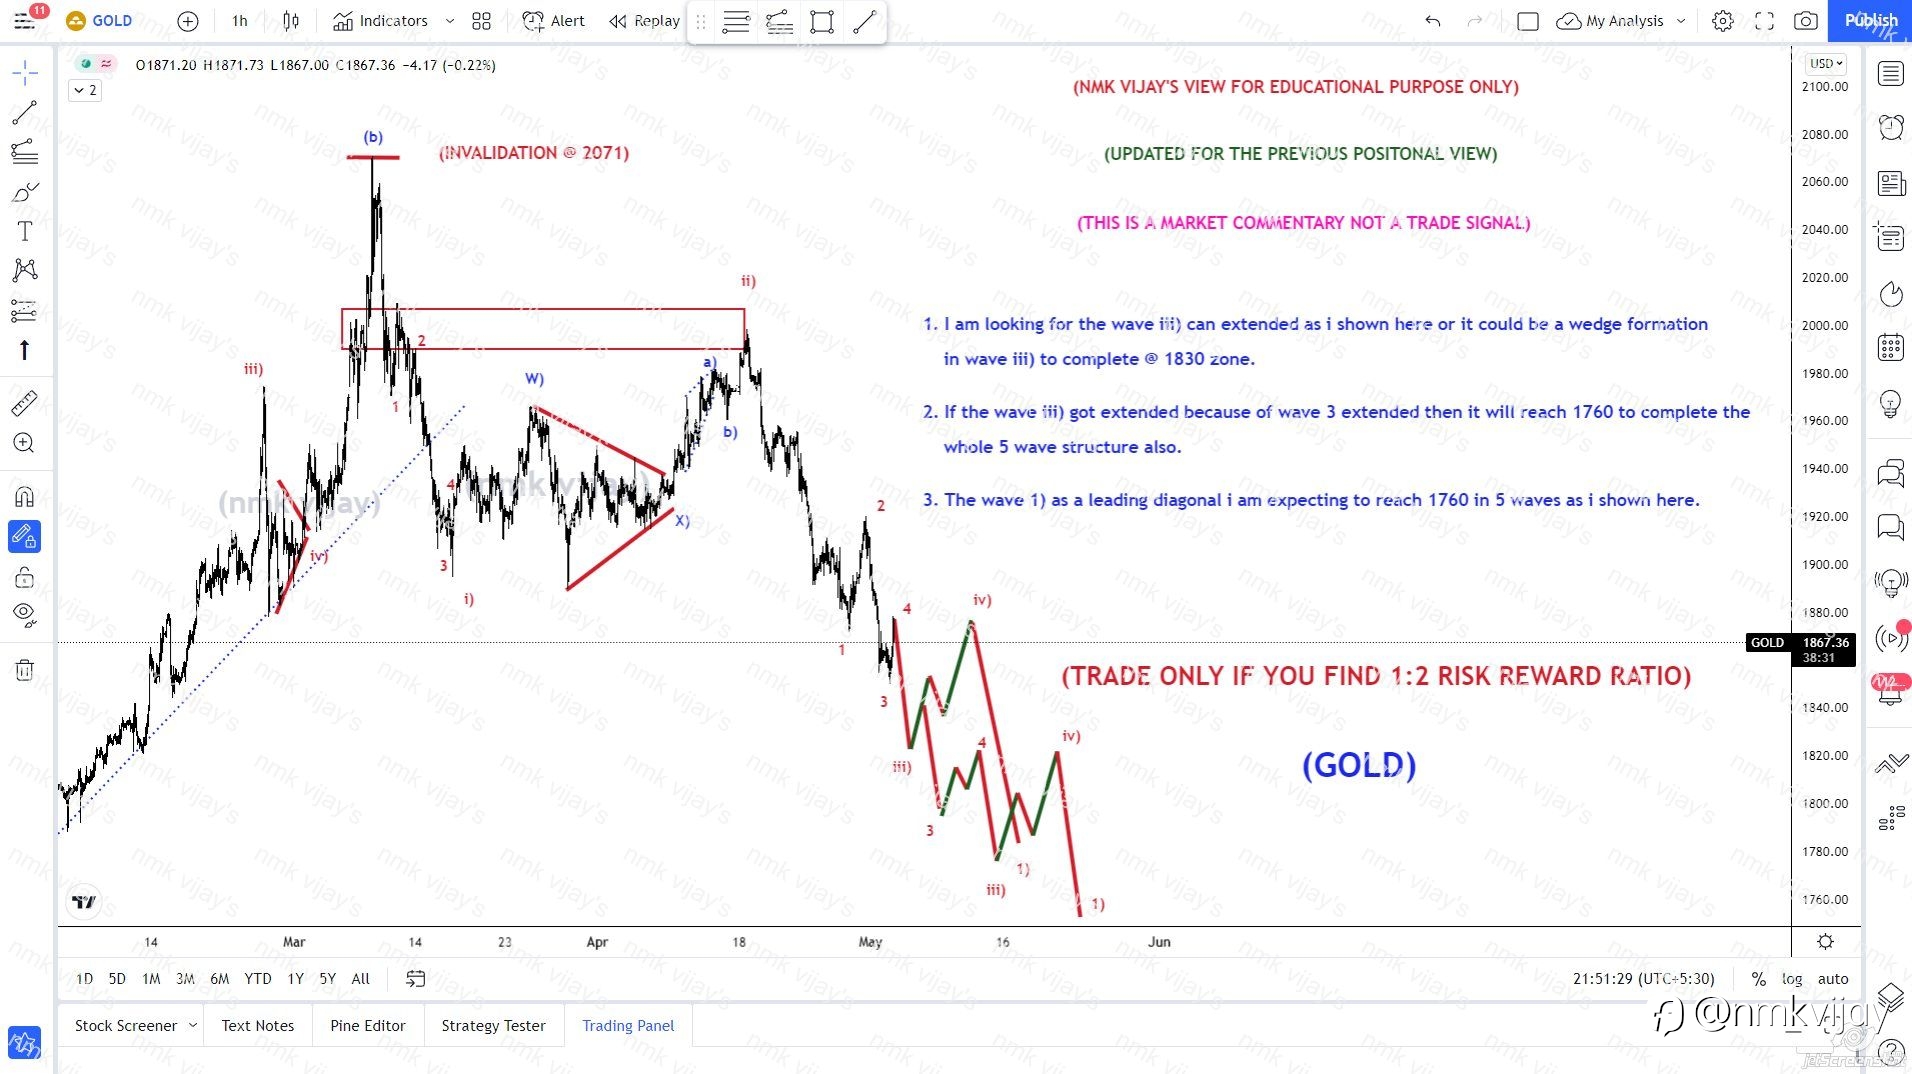 GOLD-Same plan as a leading diagonal in wave 1) to 1760 ?